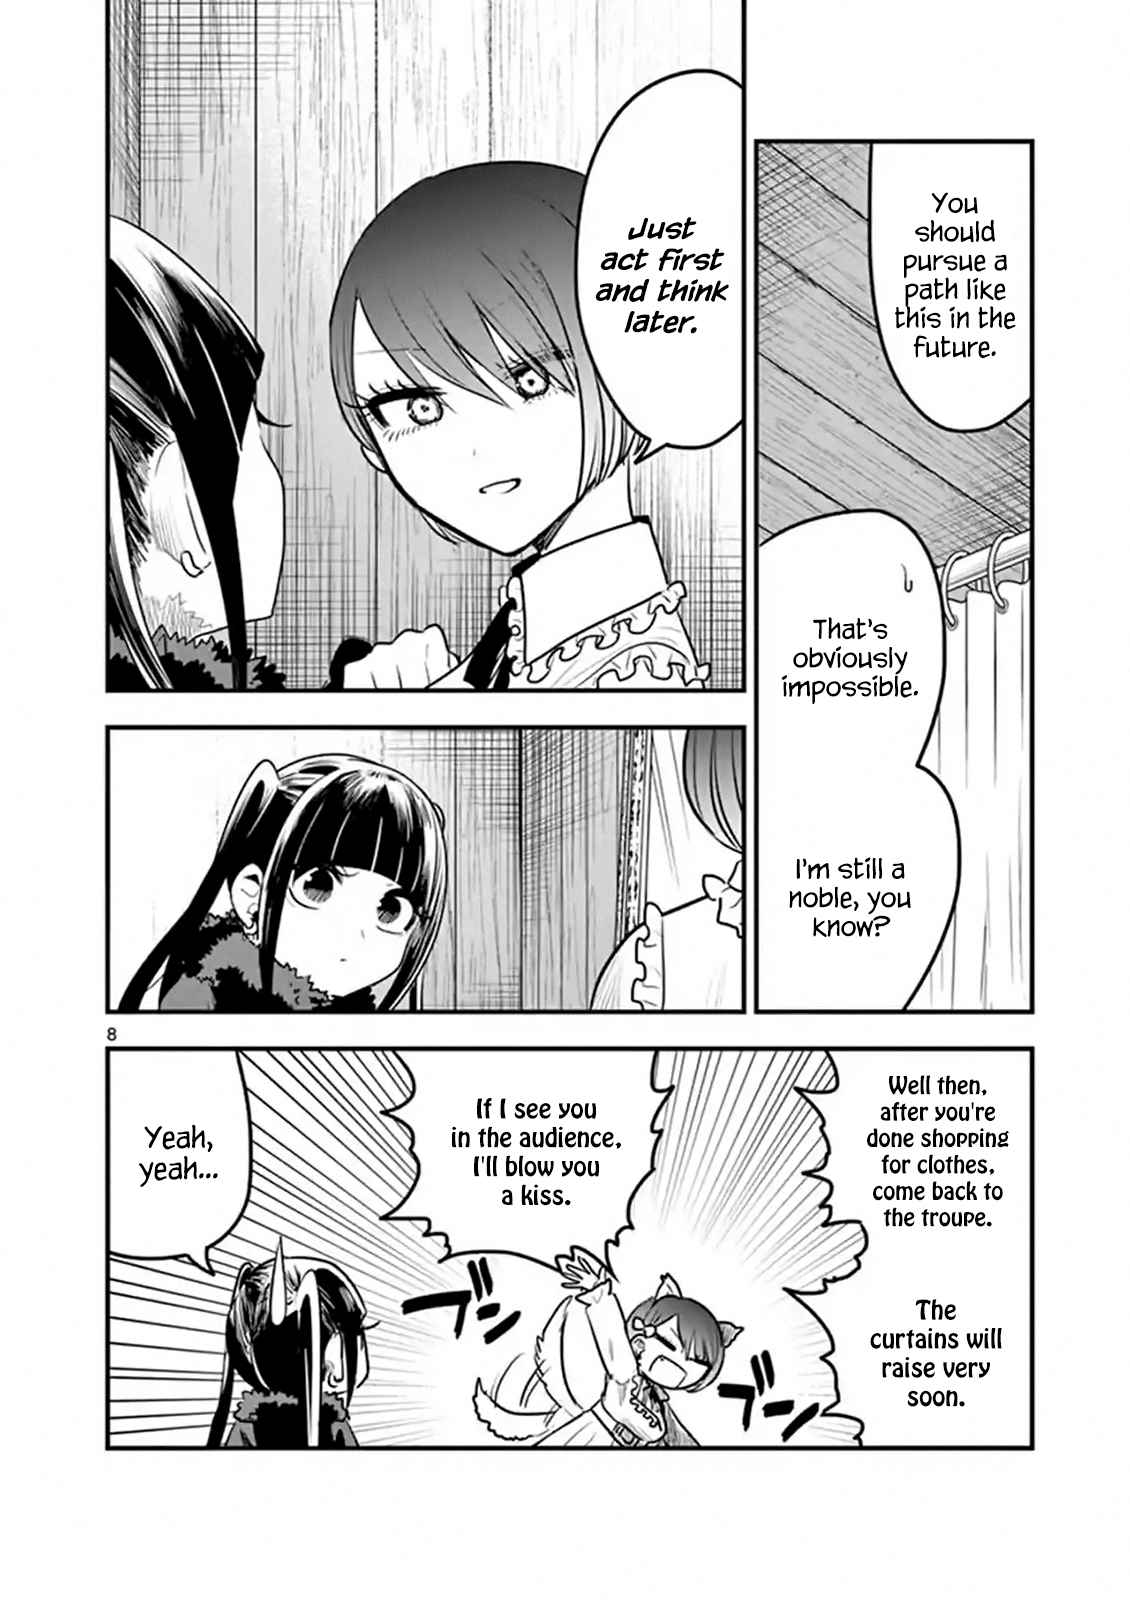 The Duke of Death and His Black Maid Vol. 7 Ch. 108 Shopping